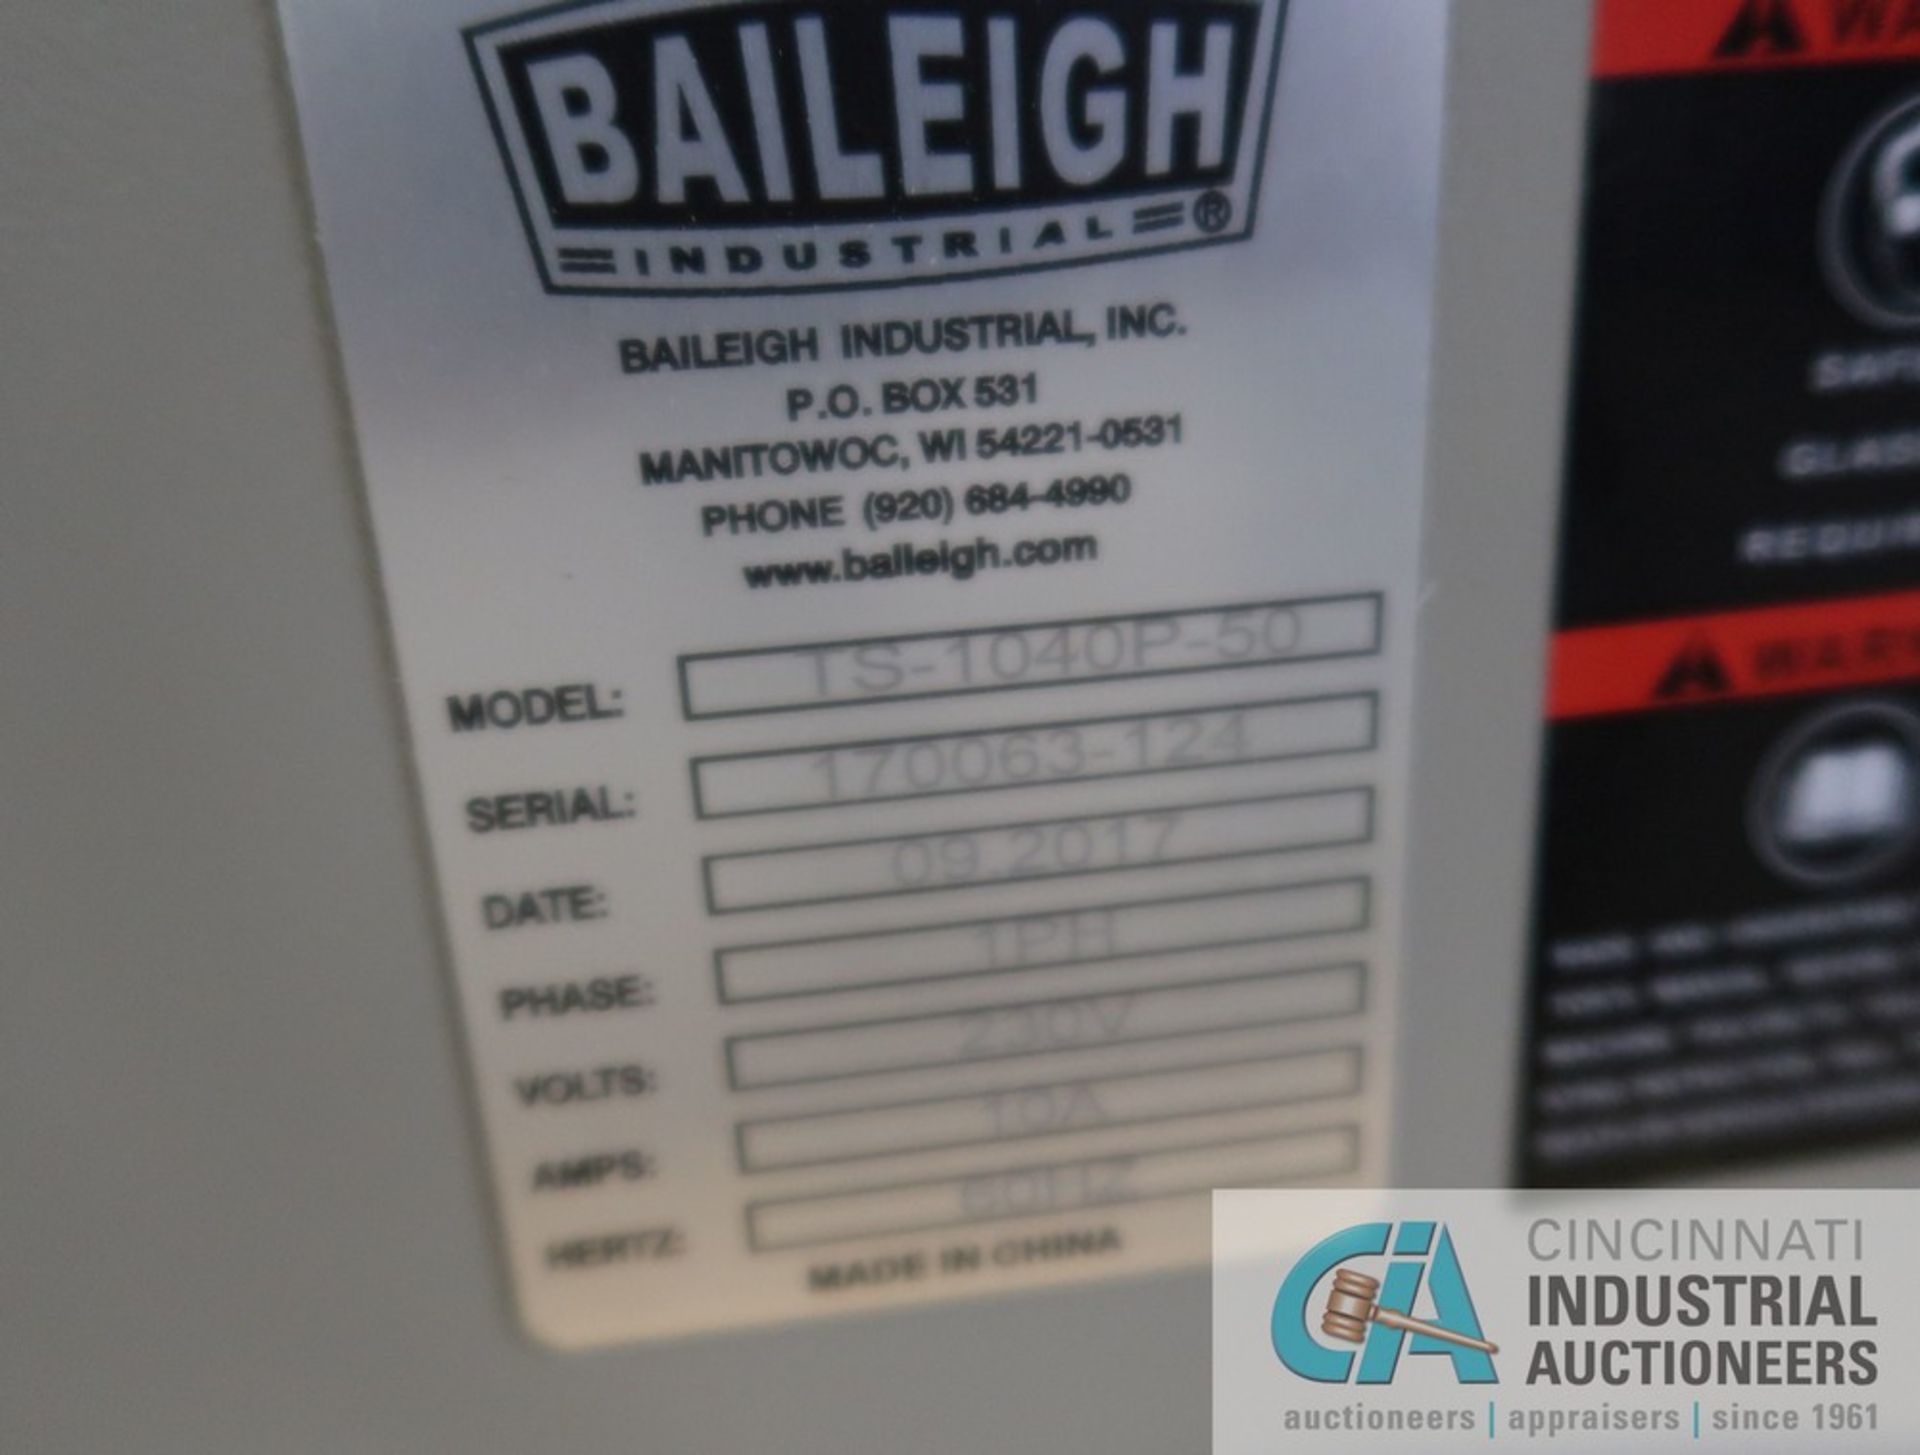 10" BAILEIGH MODEL TS-1040P050 TABLE SAW; S/N 170063-124 (NEW 9-2017), WITH T-SQUARE RIP FENCE - Bild 7 aus 8